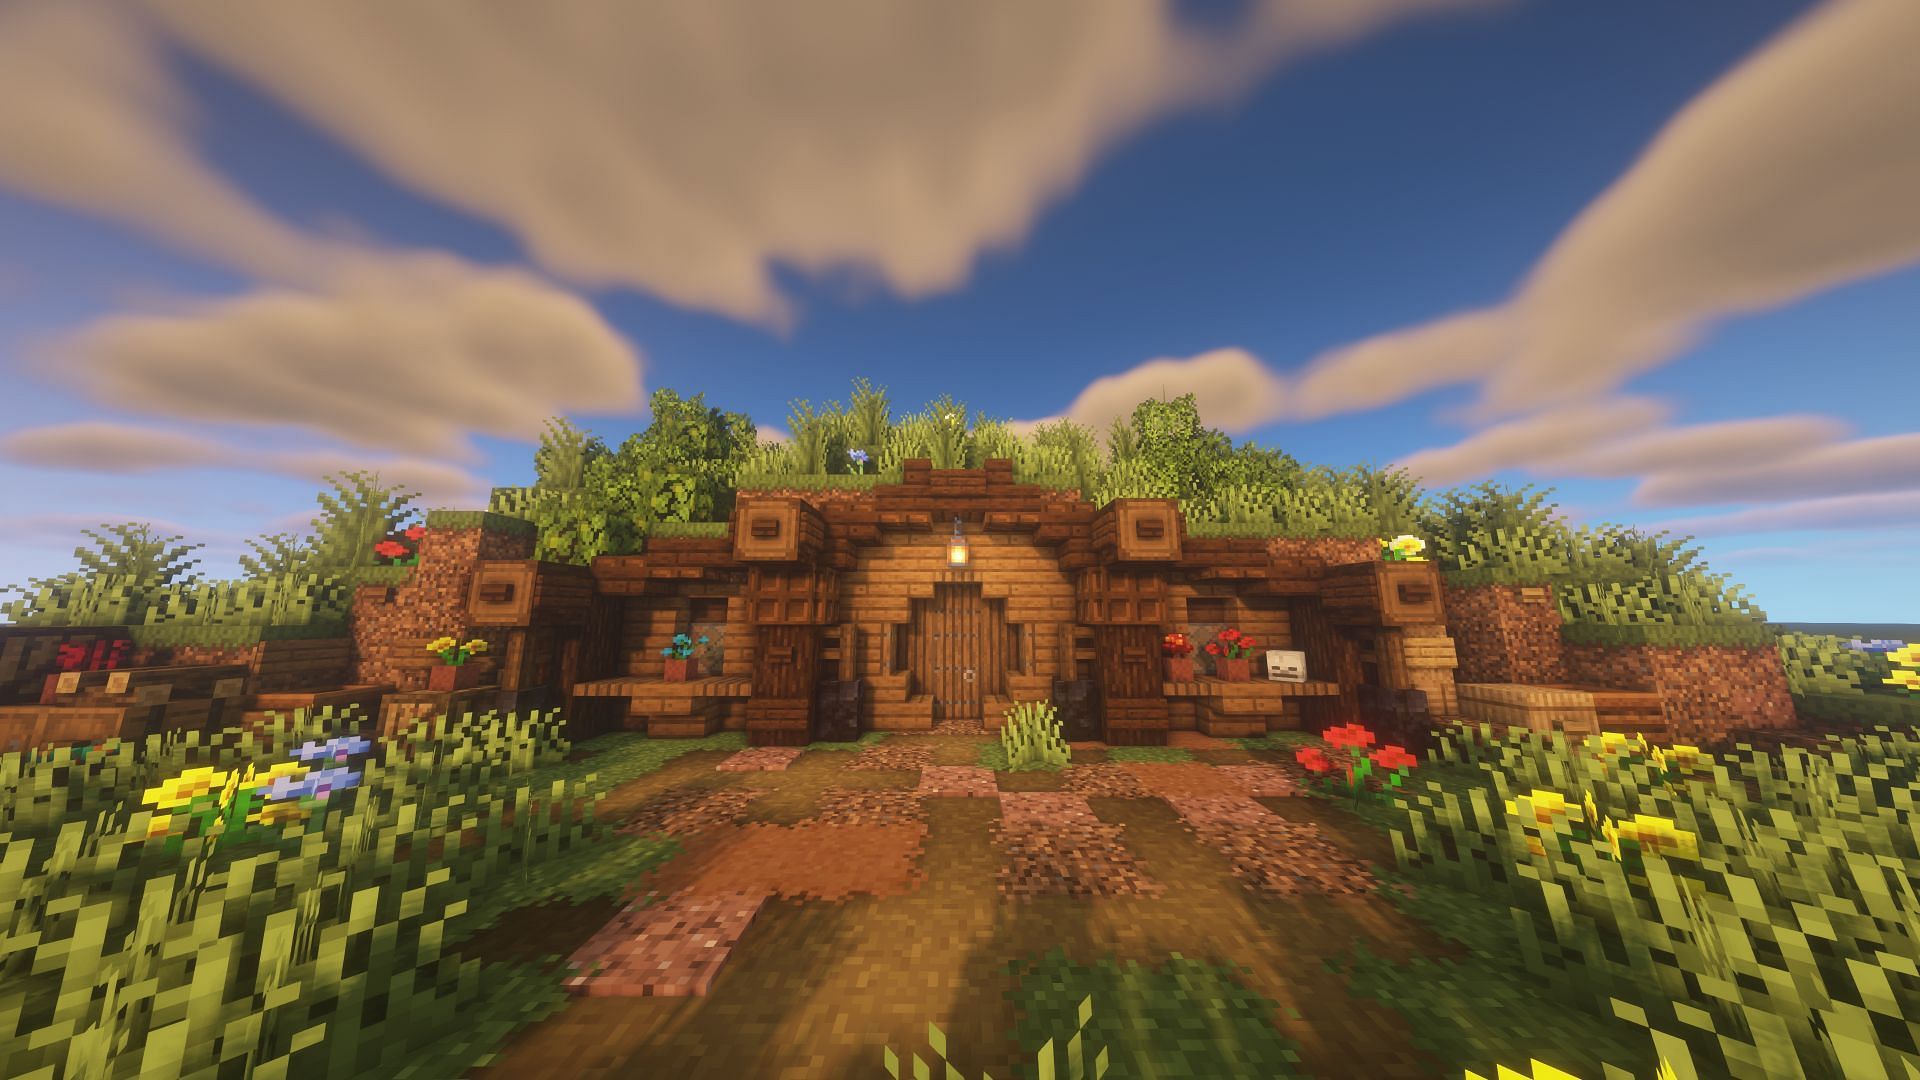 Lord of the Rings fans can create a simple hobbit hole in Minecraft (Image via Reddit / u/Igor_Gyepreteper)